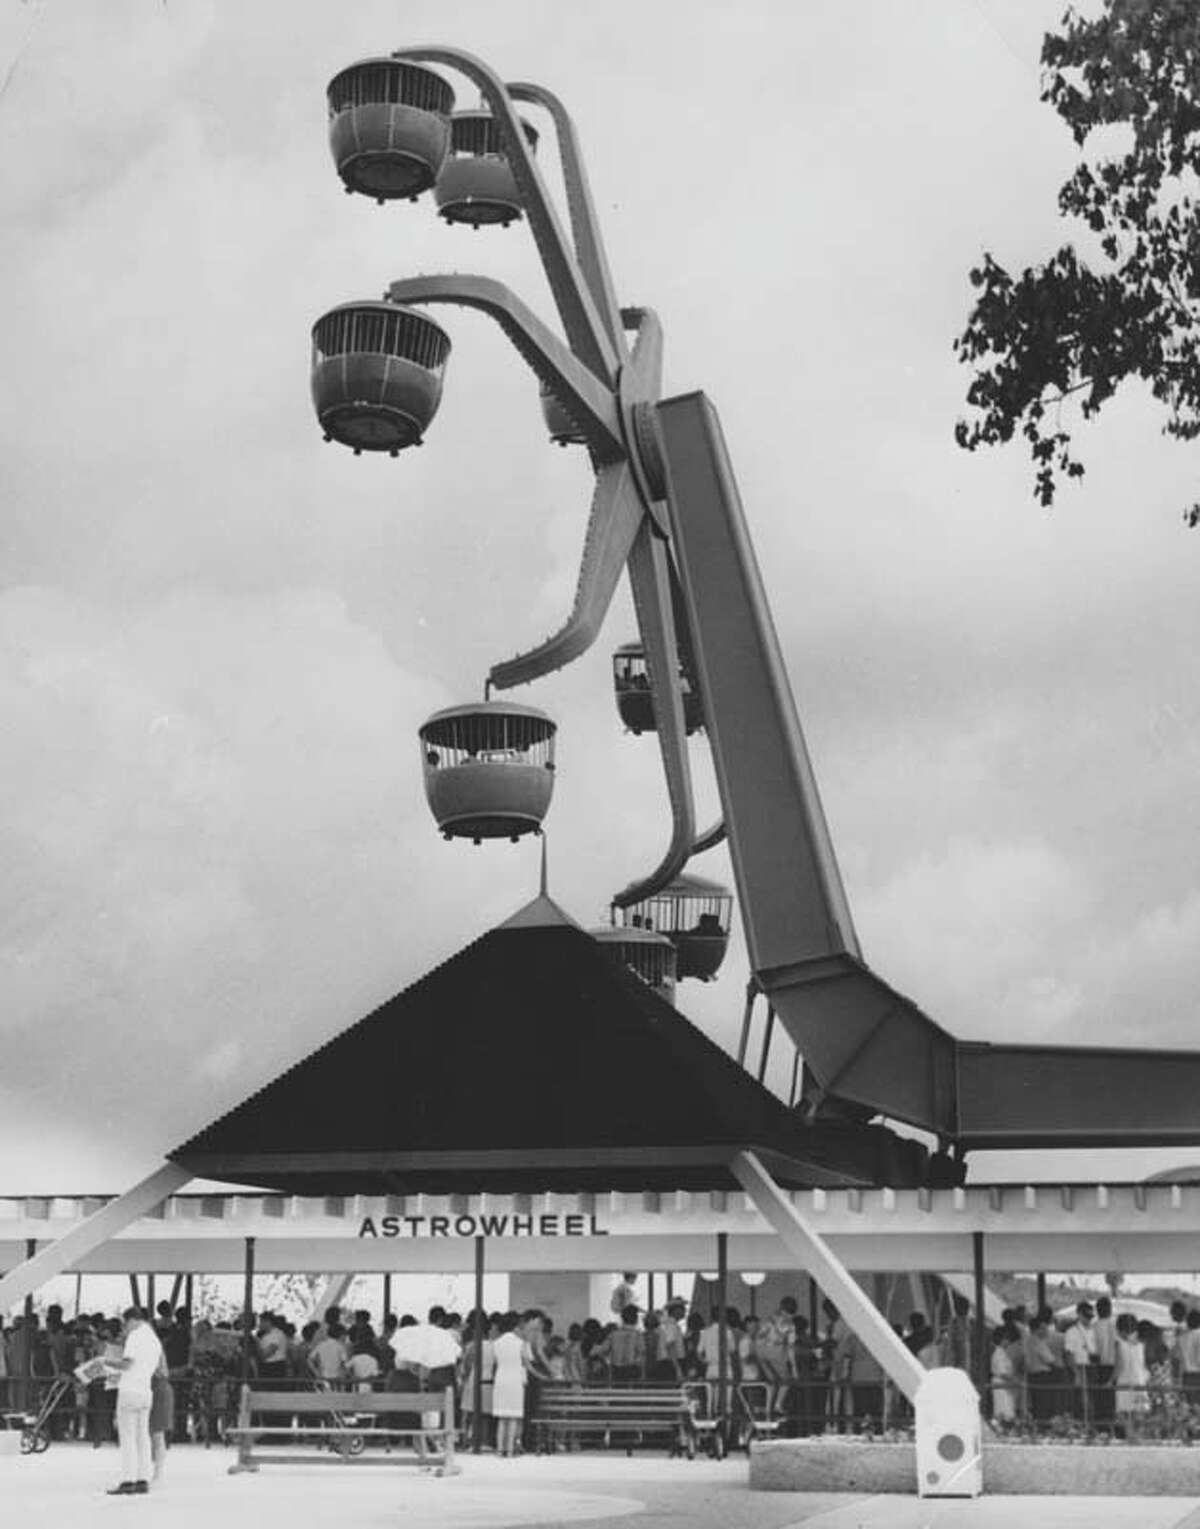 The Astrowheel was one of AstroWorld's original rides. It is pictured here on June 1, 1968.